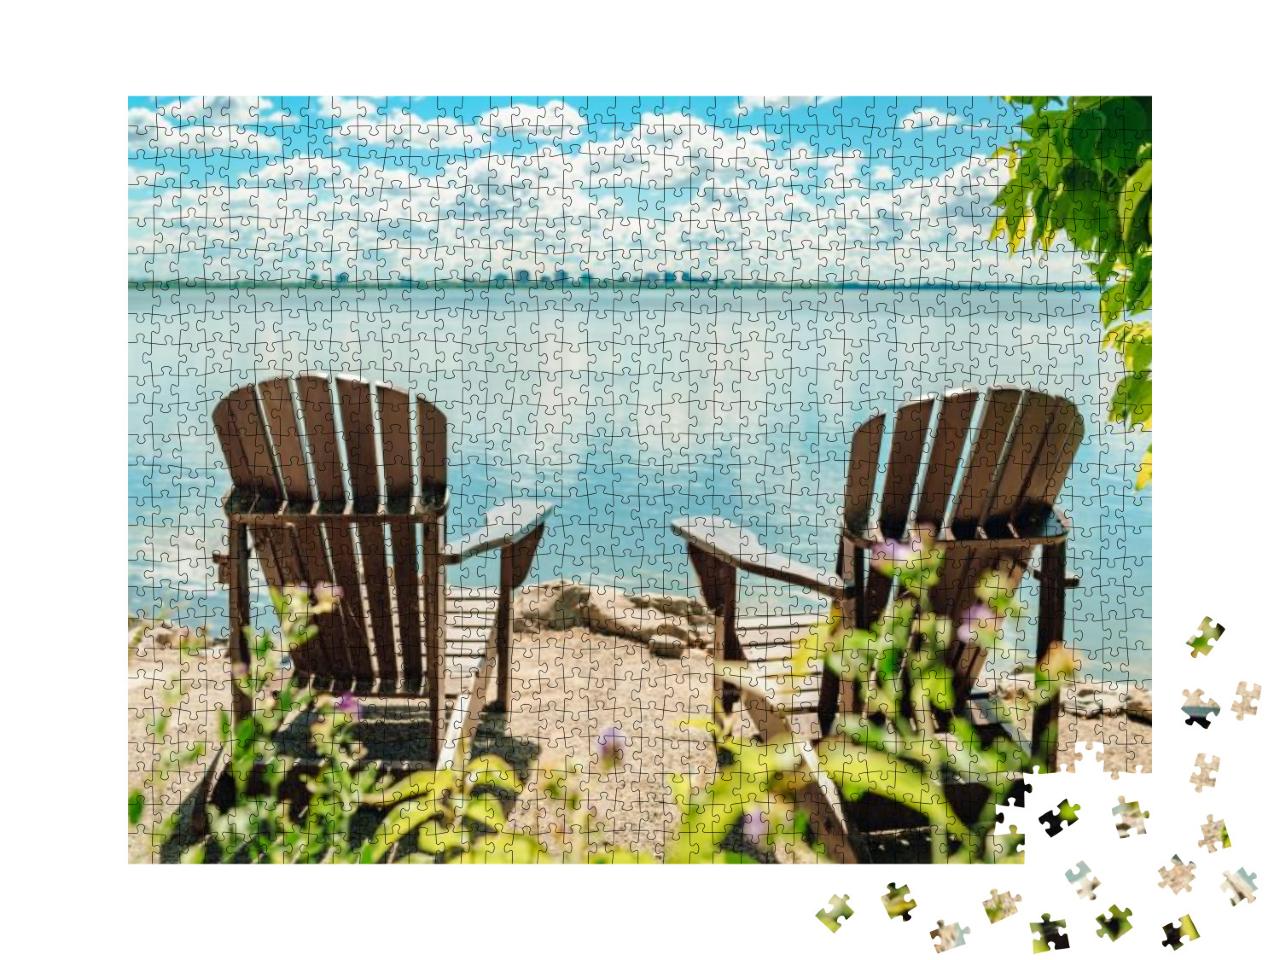 Two Muskoka Chairs by the Water on Home Terrace with Calm... Jigsaw Puzzle with 1000 pieces